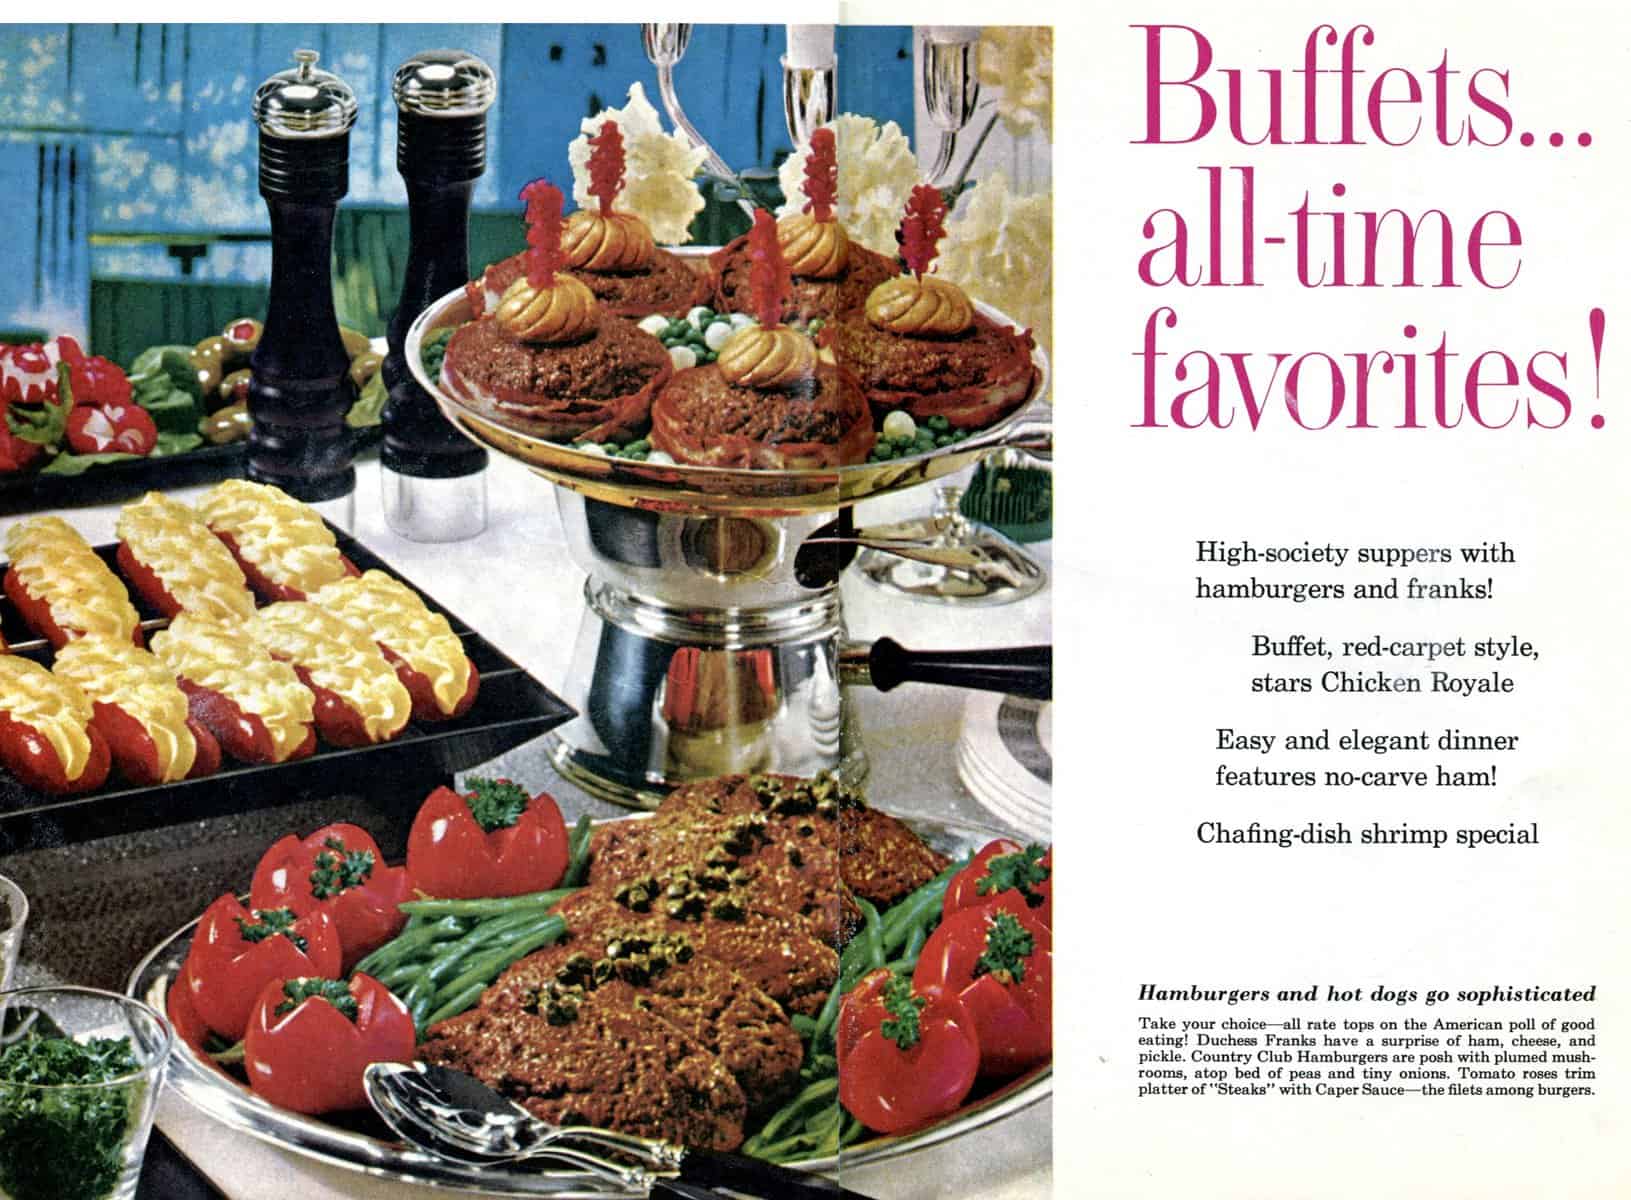 1960s Food: From Jello to Mastering French Cooking Historic Geneva